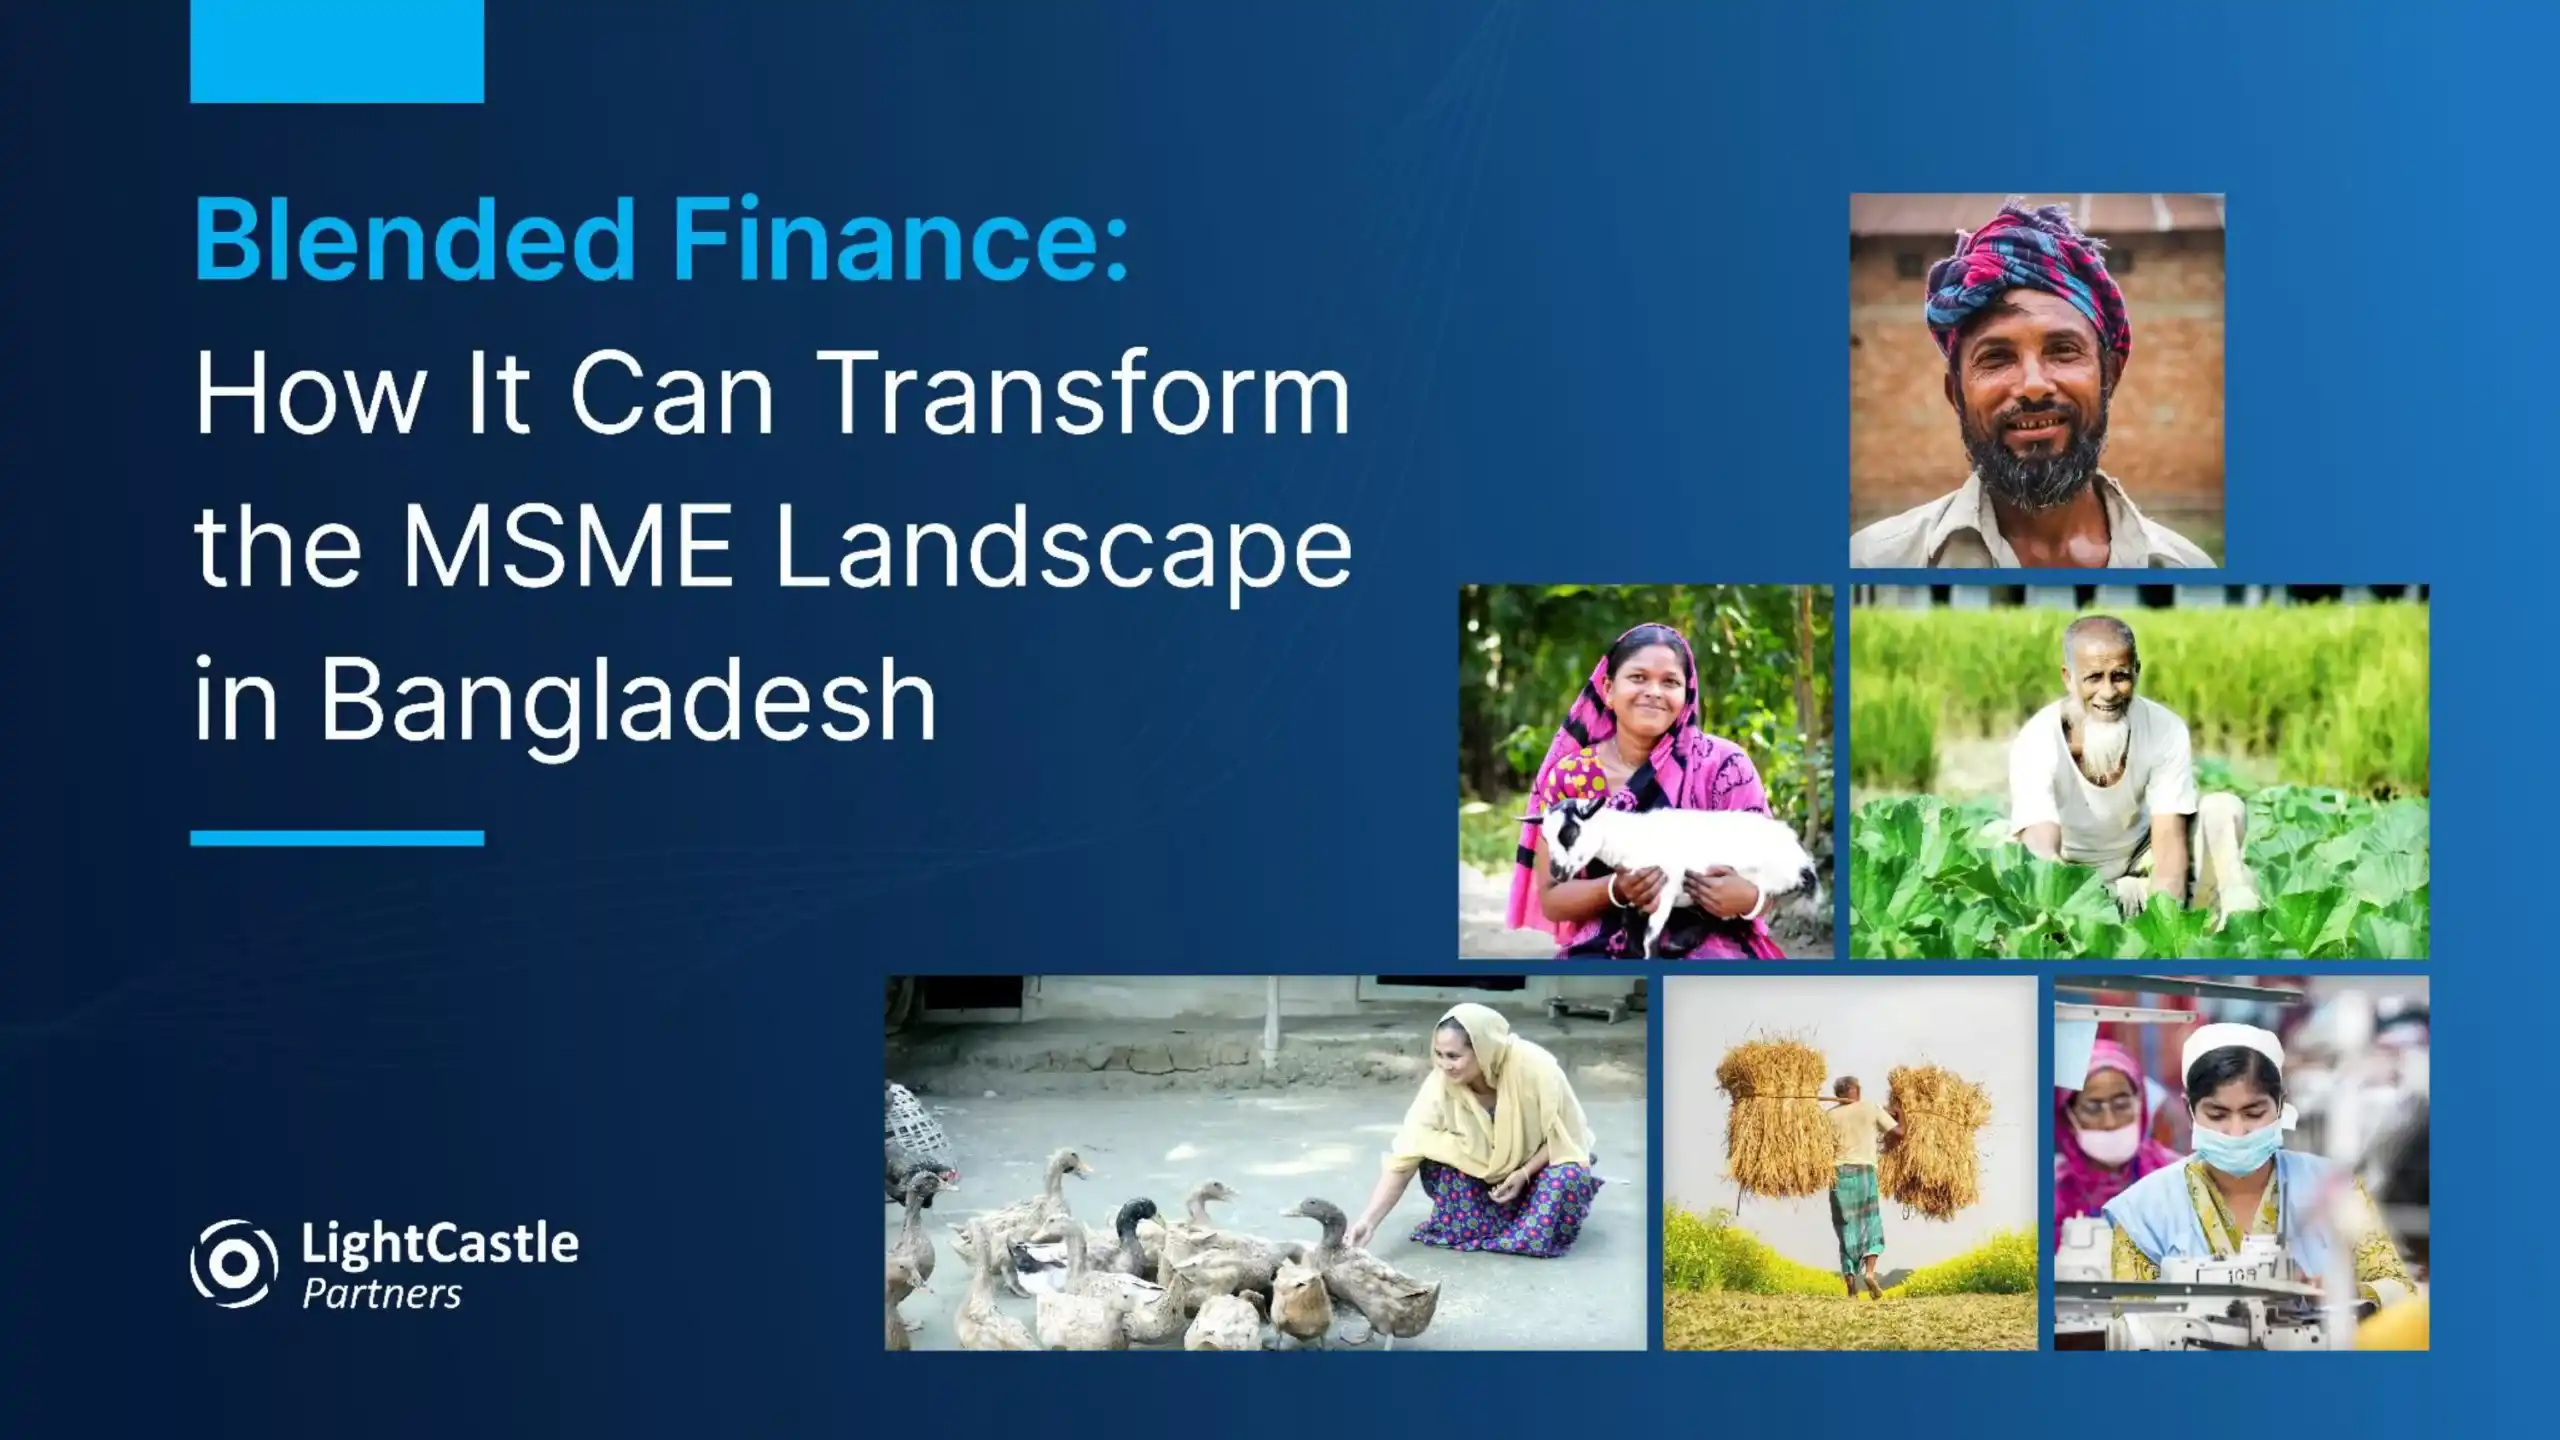 Blended Finance: How It Can Transform the MSME Landscape in Bangladesh